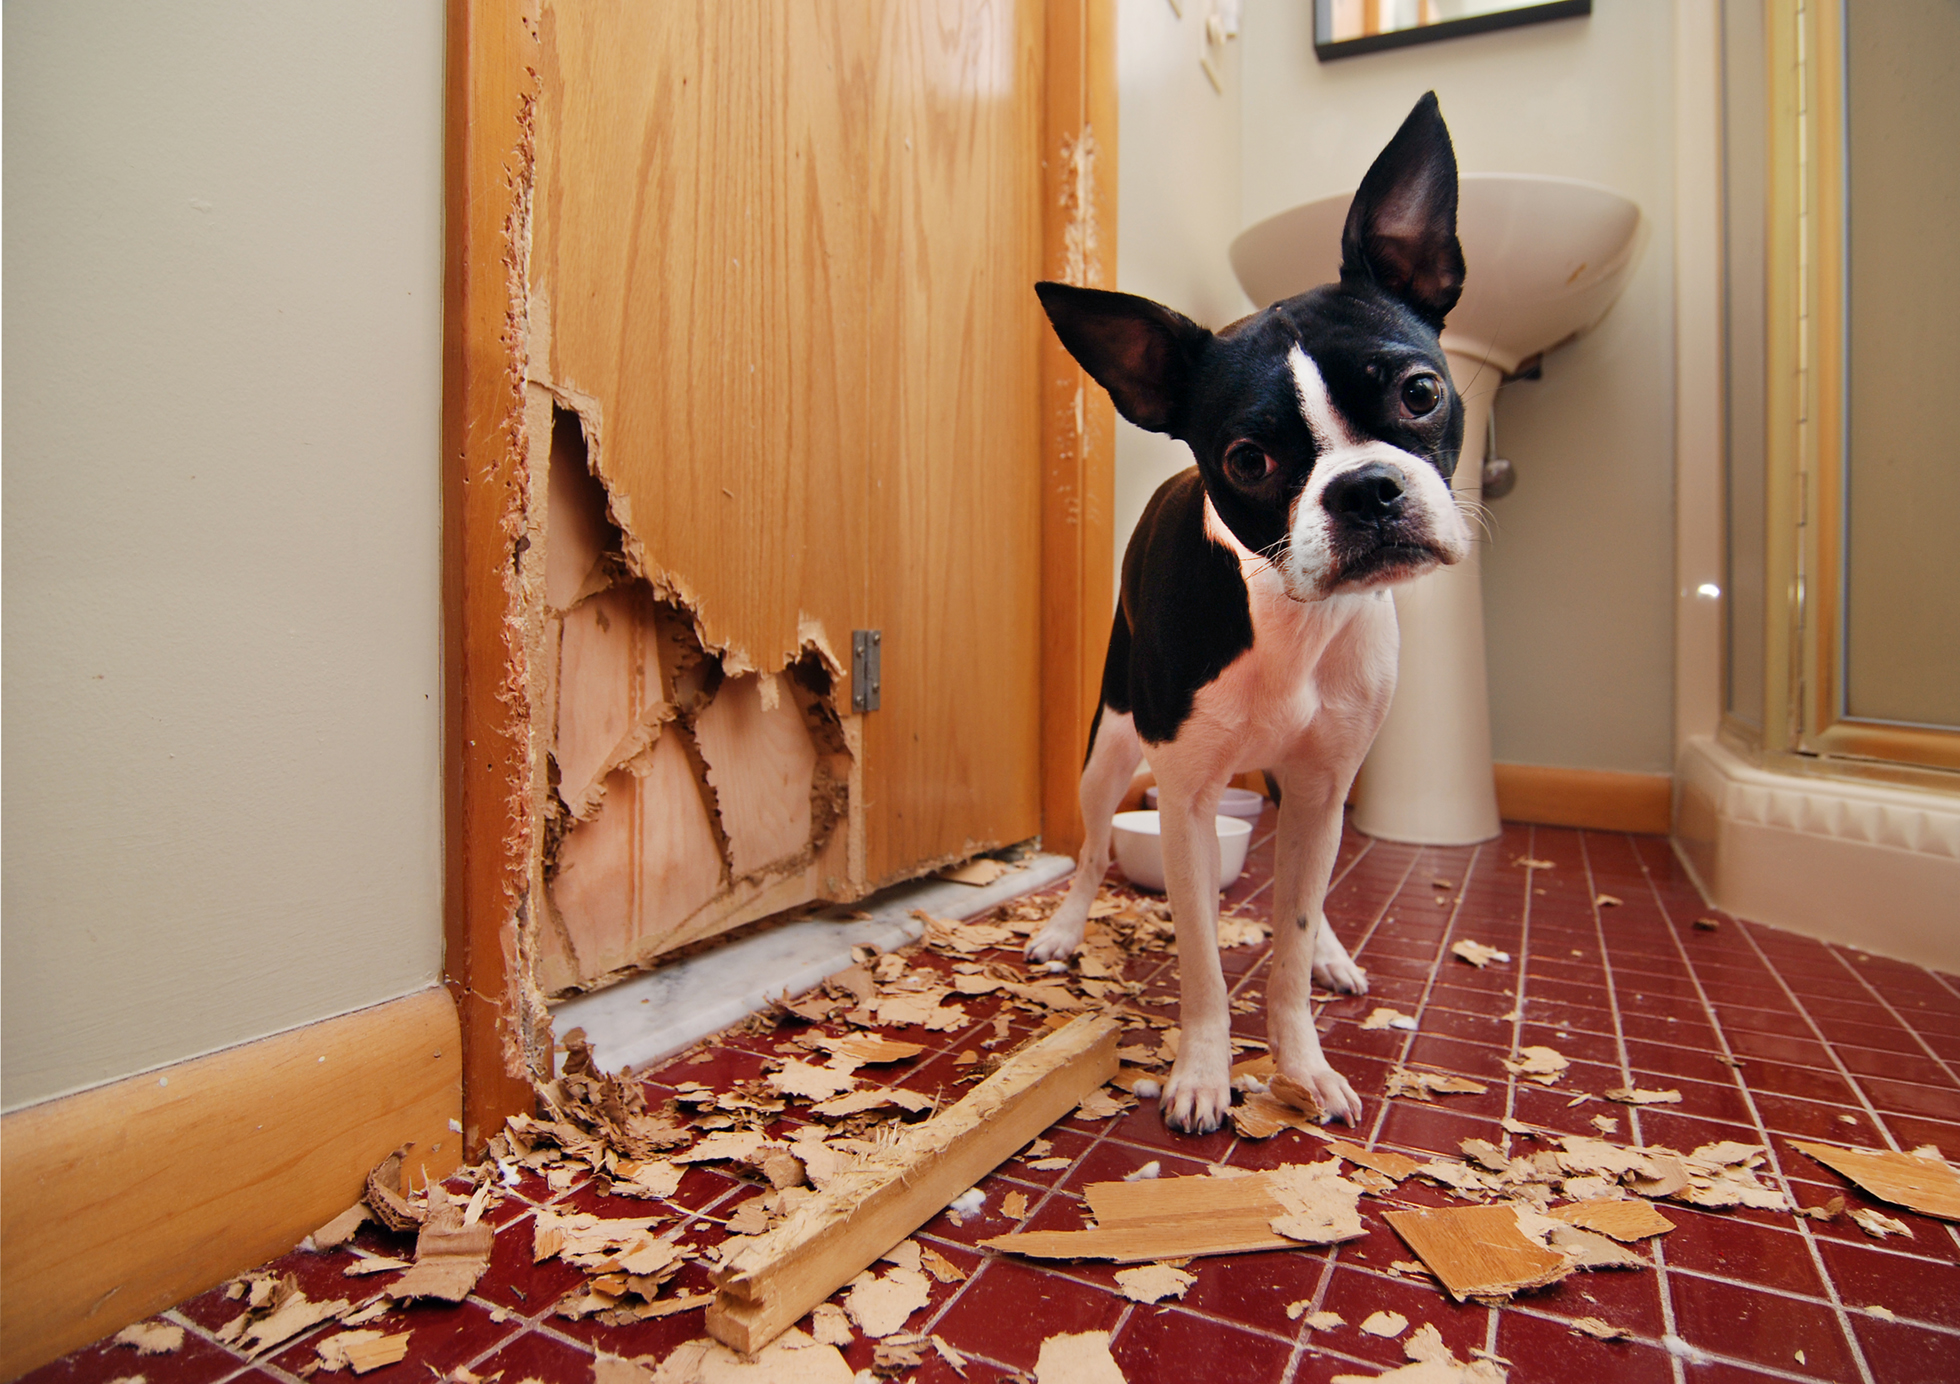 Black and white dog beside chewed up, clawed wooden door